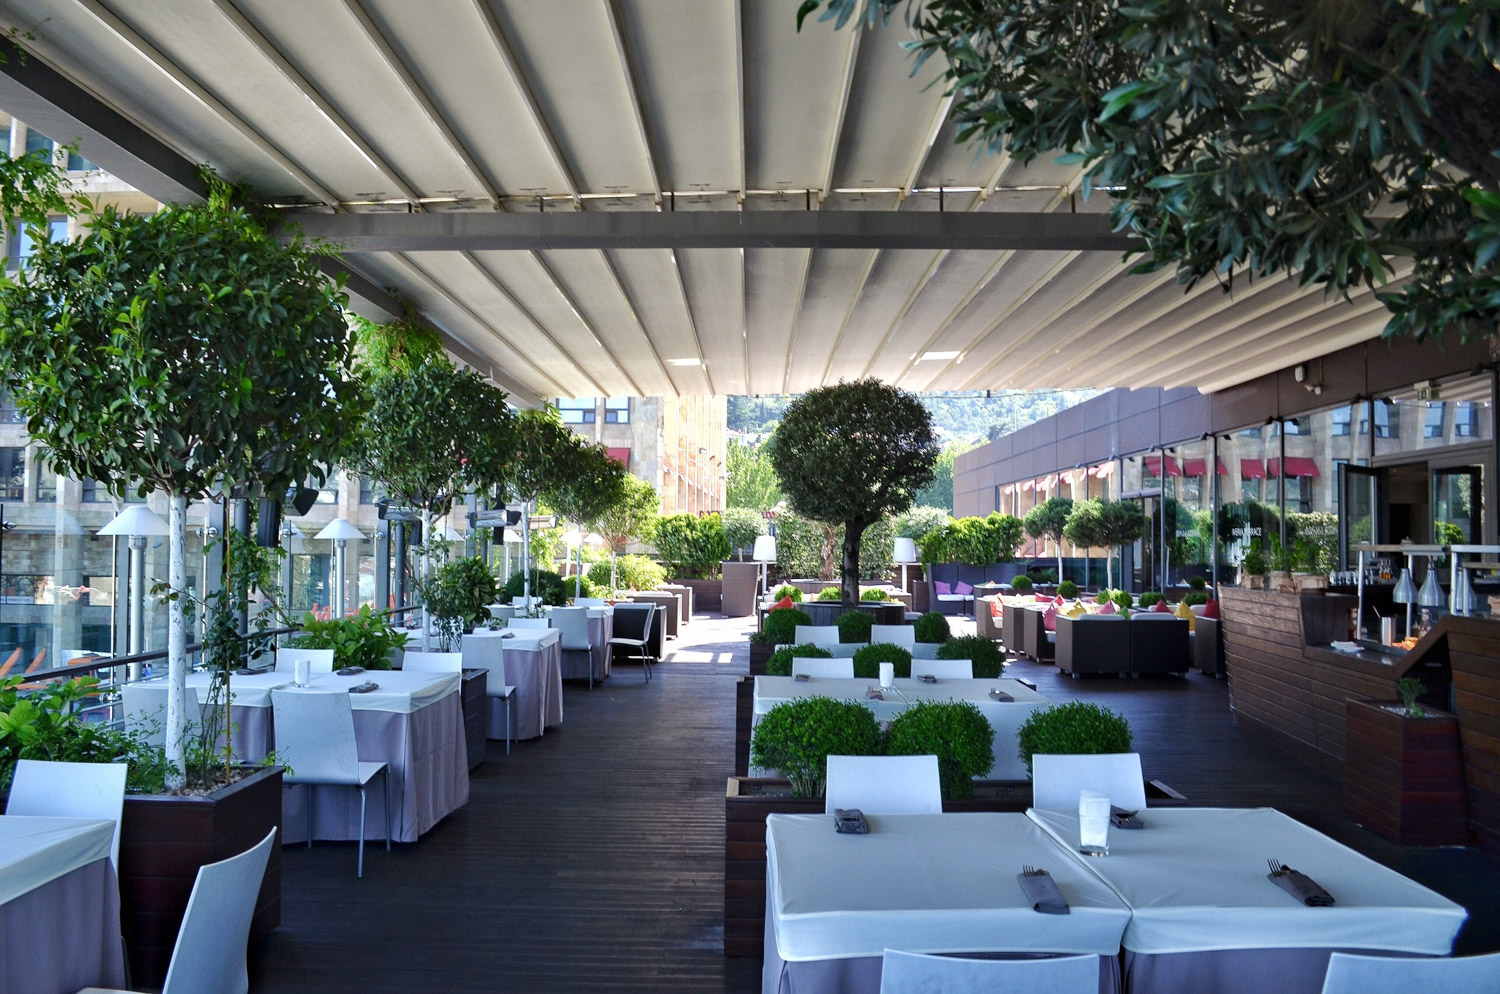 Lazy Afternoon at the Radisson Blu Iveria Terrace